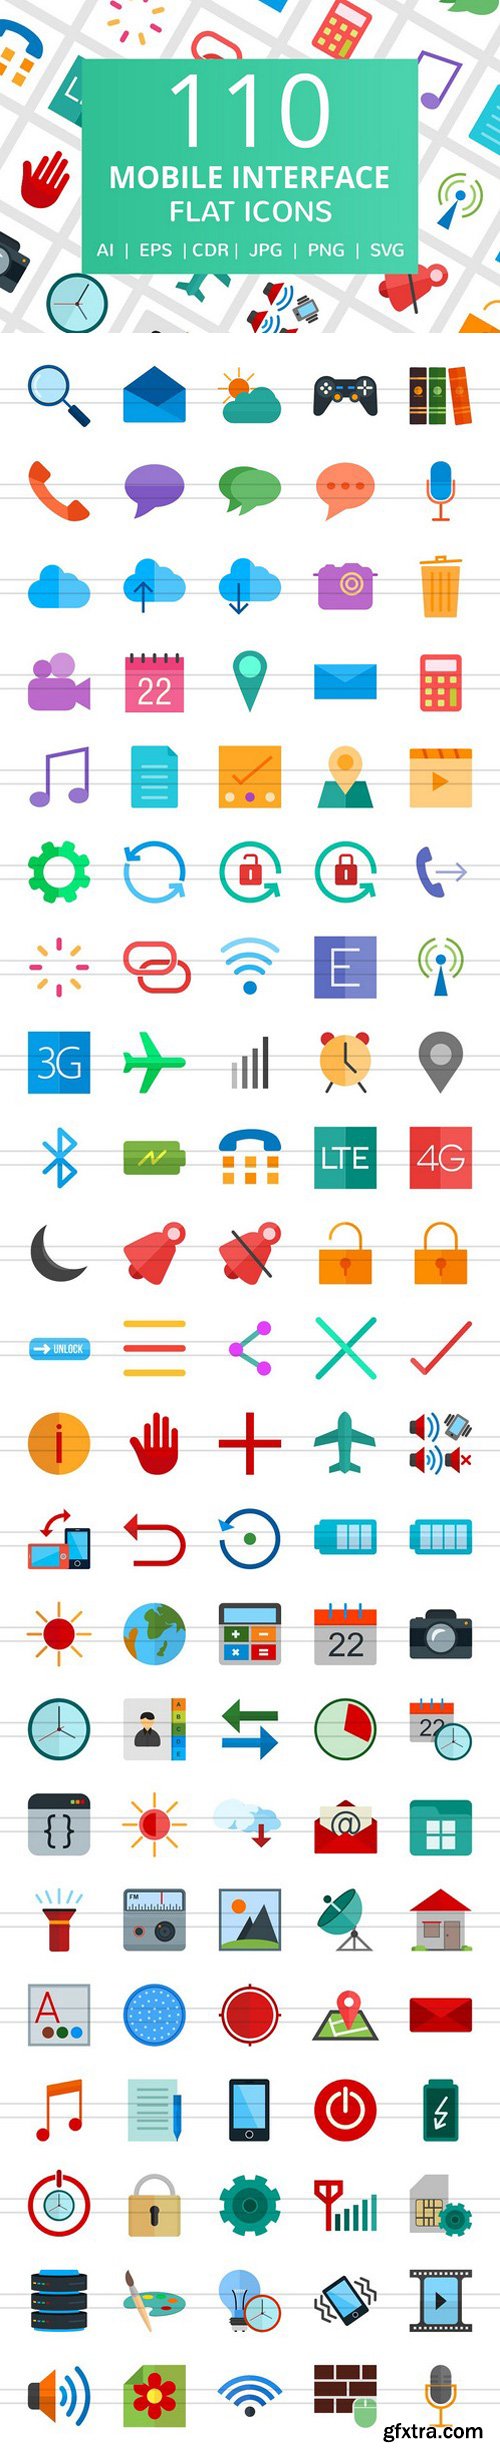 CM - 111 Mobile Interface Flat Icons 2185404